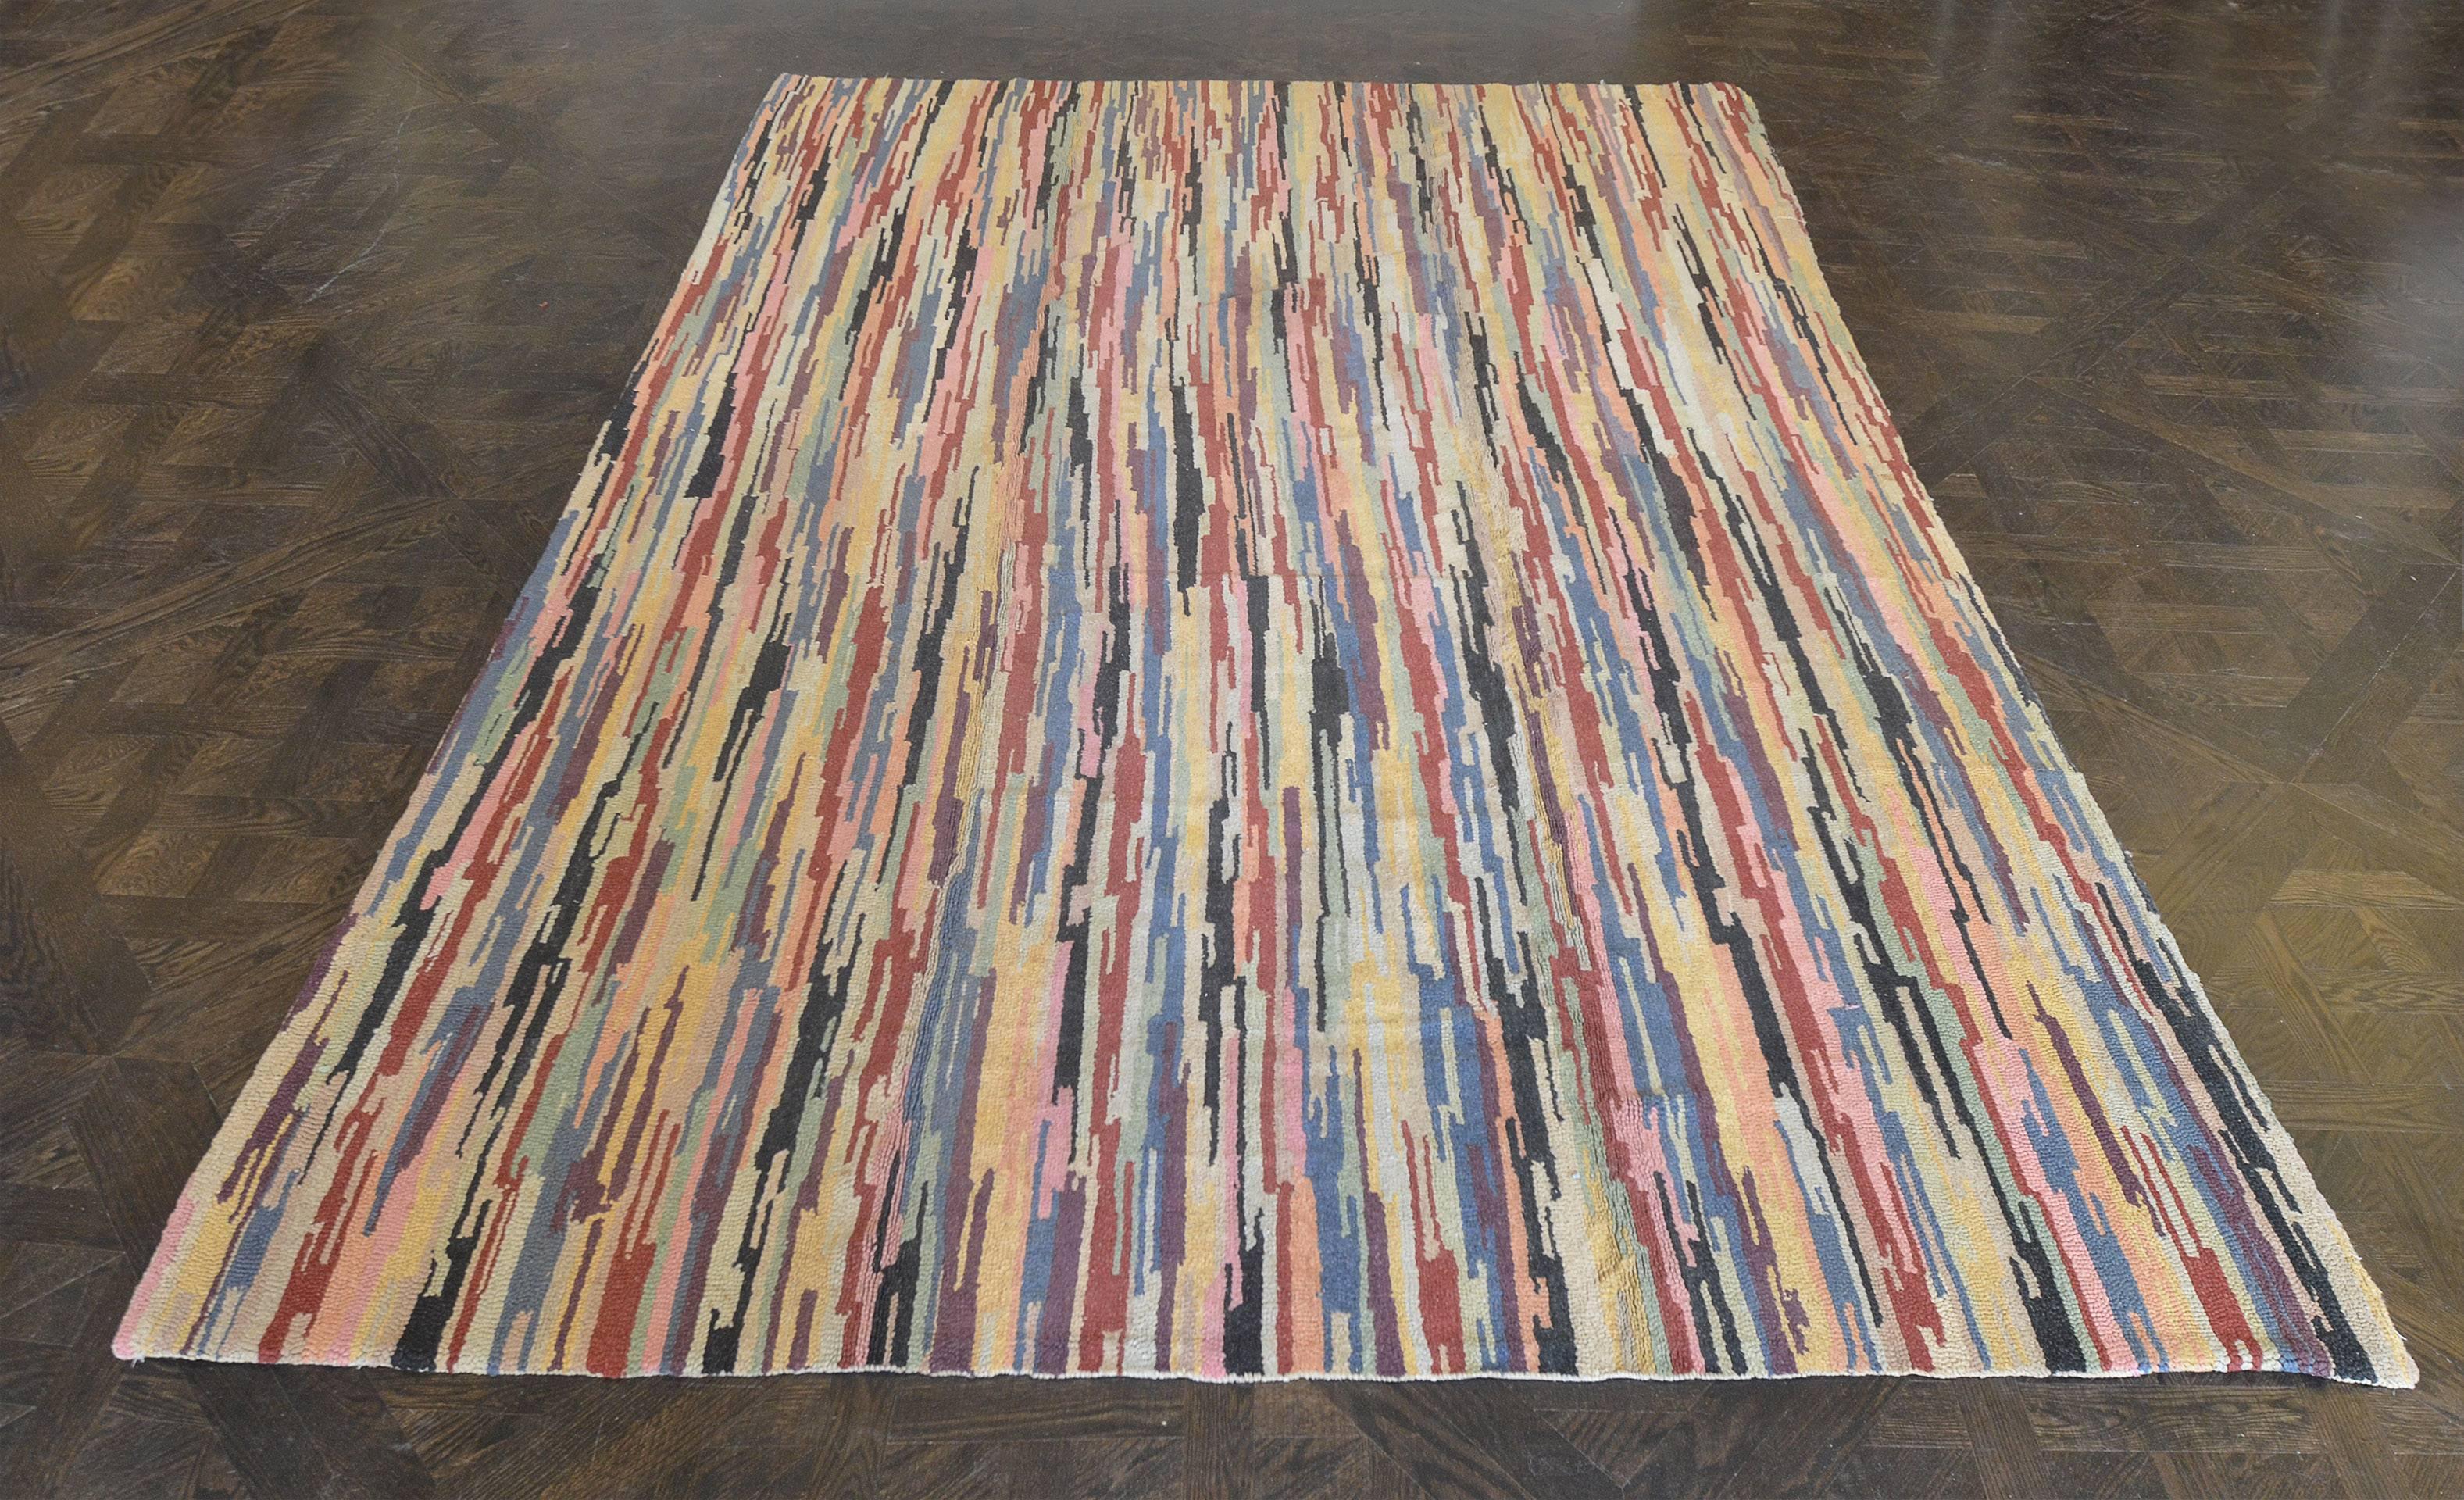 This vintage handwoven North American Hooked rug has an overall field of gently waving vertical polychrome strokes of green, blue, purple, pink, red and black, on a beige background.